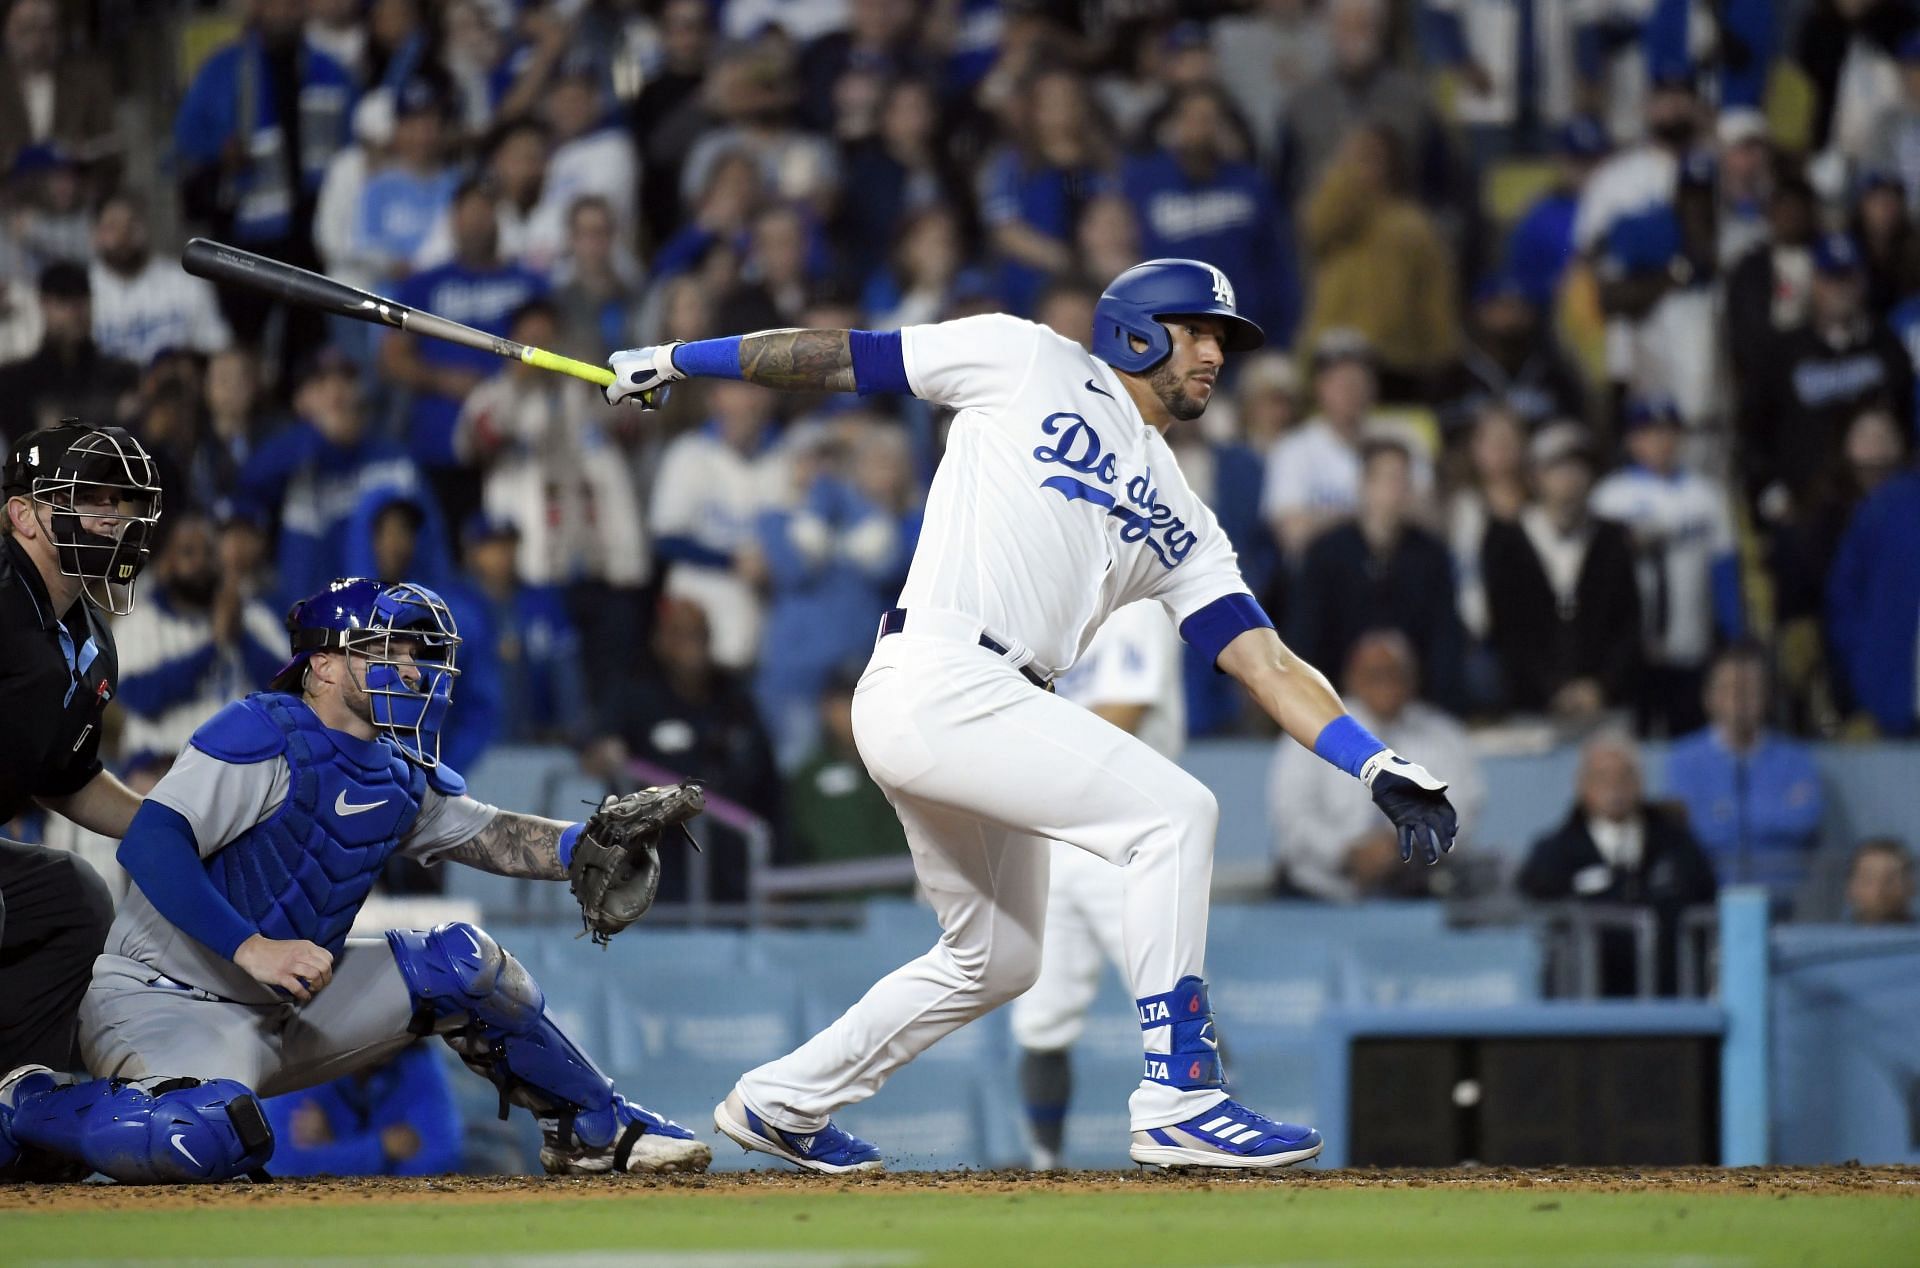 Dodgers sign outfielder David Peralta to one-year deal - CBS Los